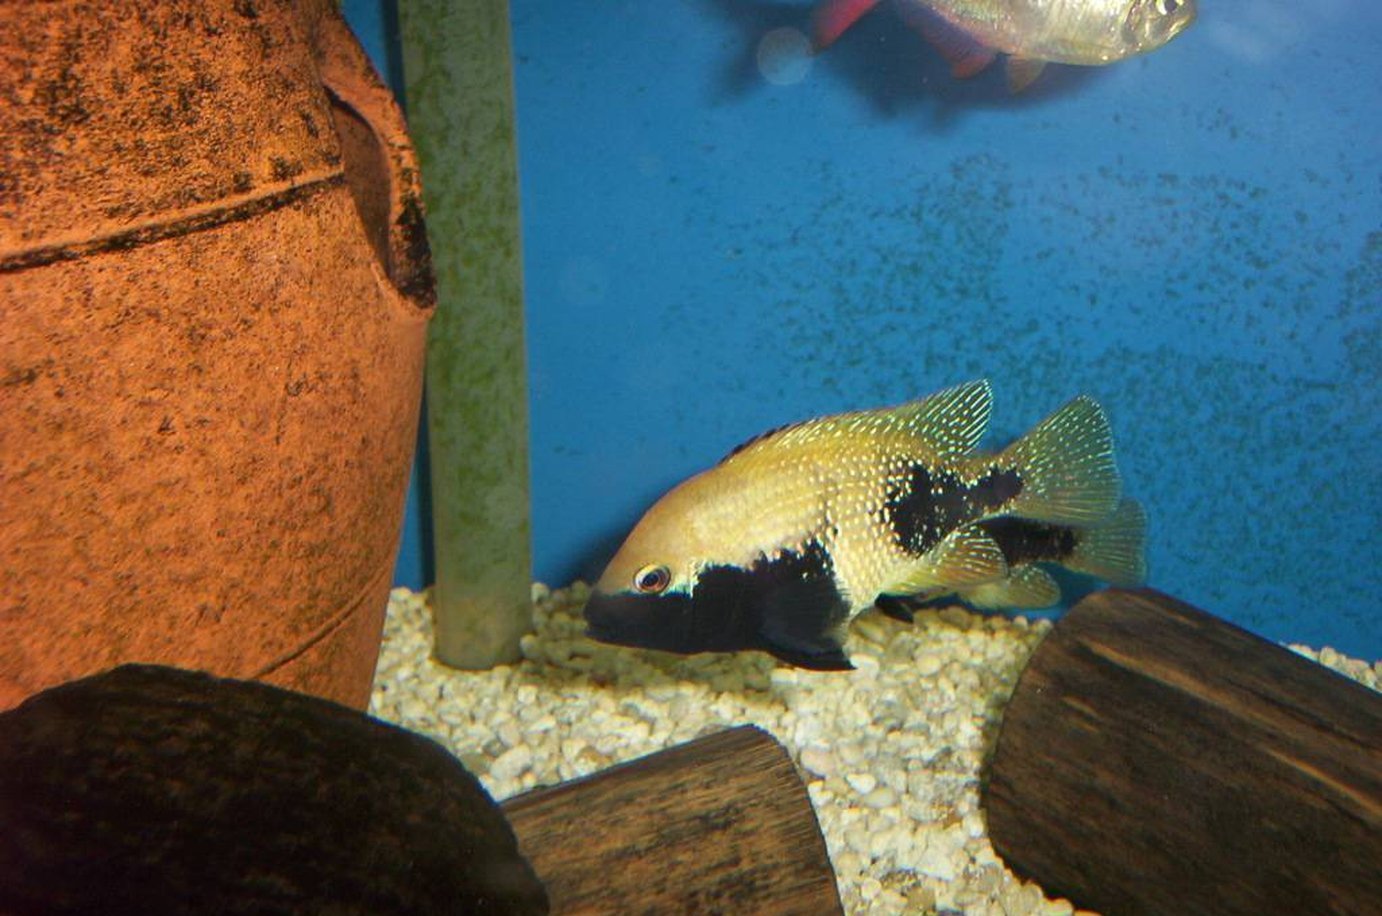 x1 Package - Yellow Herichthys Labridens Cichlid Sml 1"- 1 1/2" Each-Cichlid - Neotropical-www.YourFishStore.com